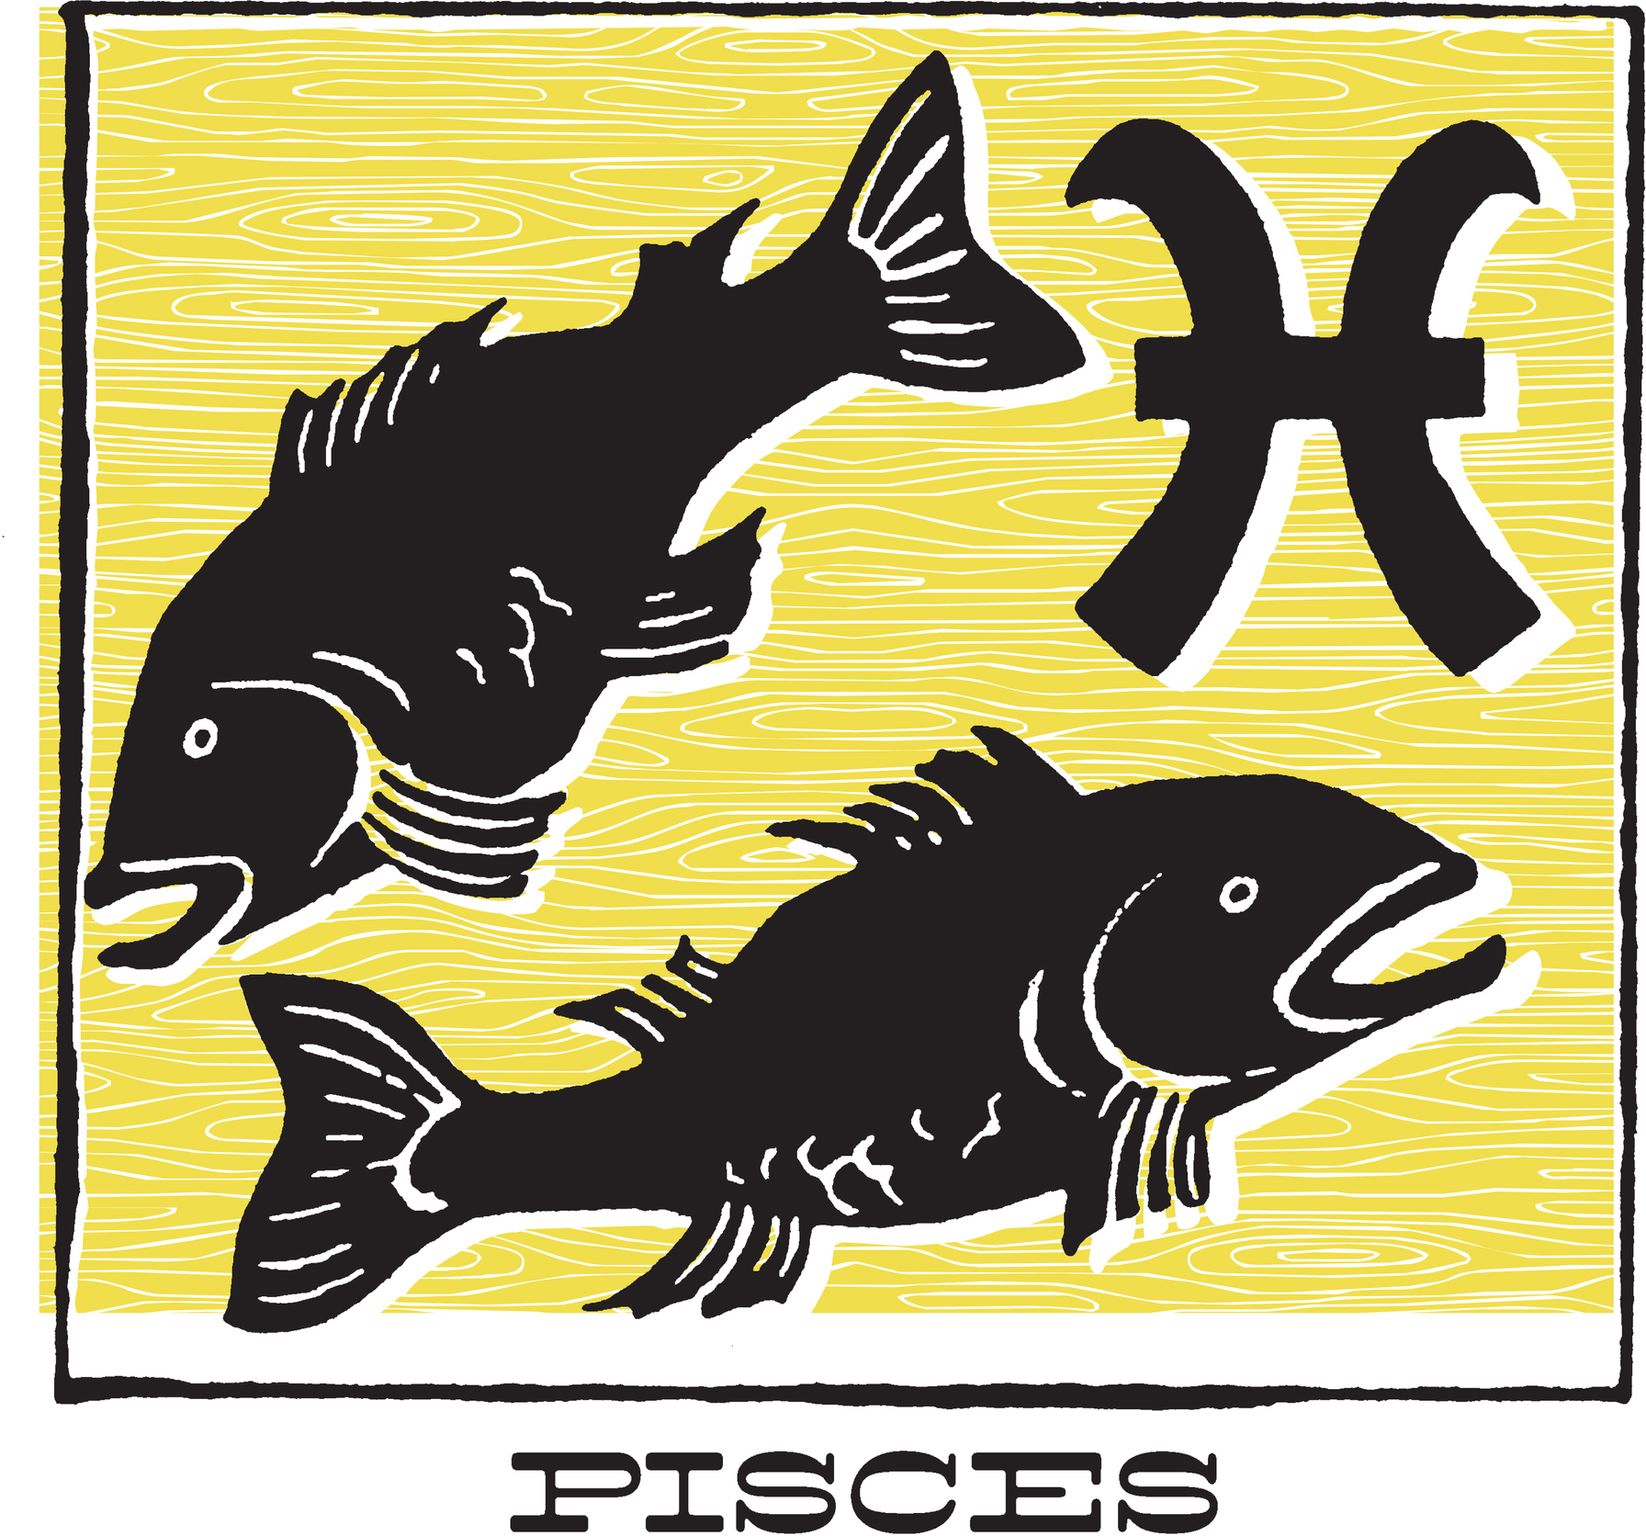 An image of the zodiac sign Pisces. | Source: Getty Images